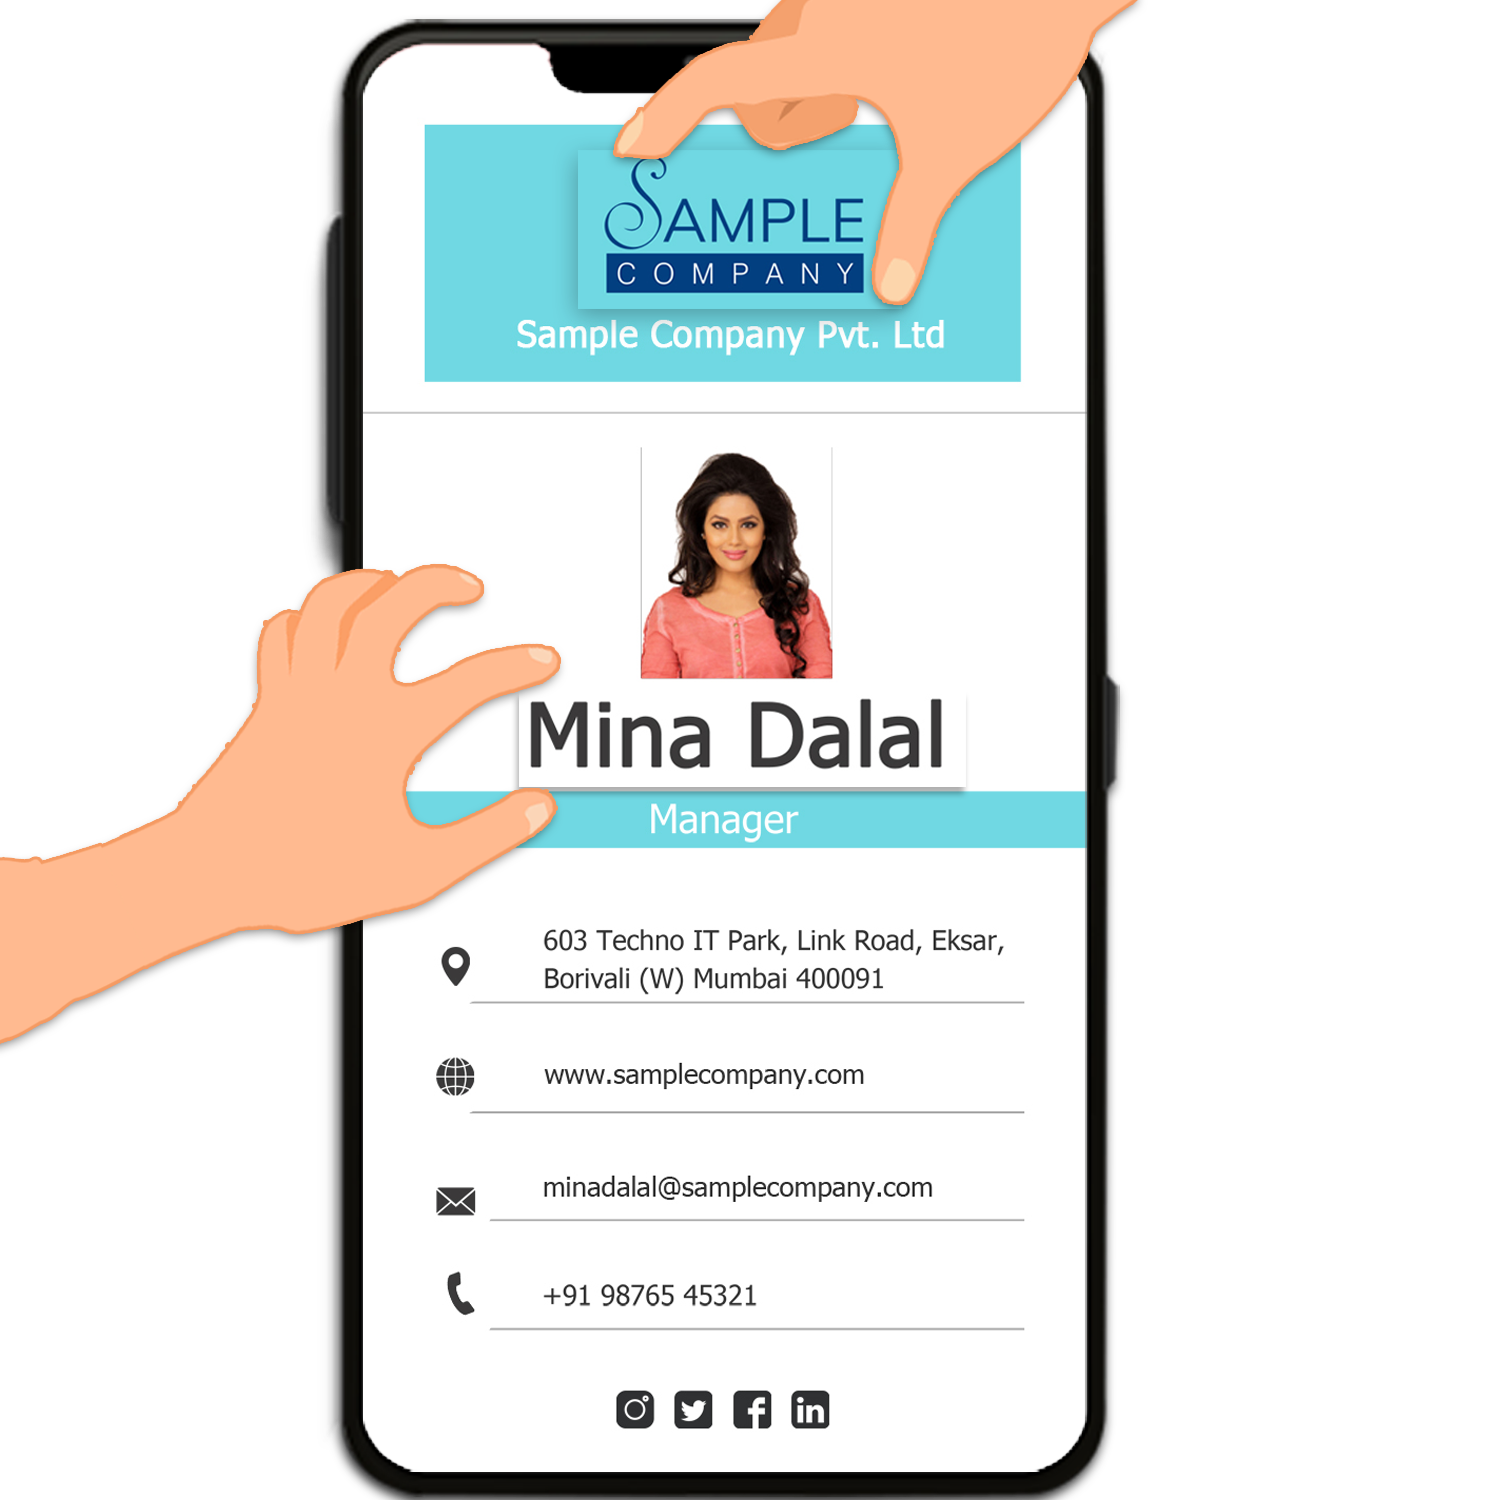 Personalizable Business Cards by VistaShopee App